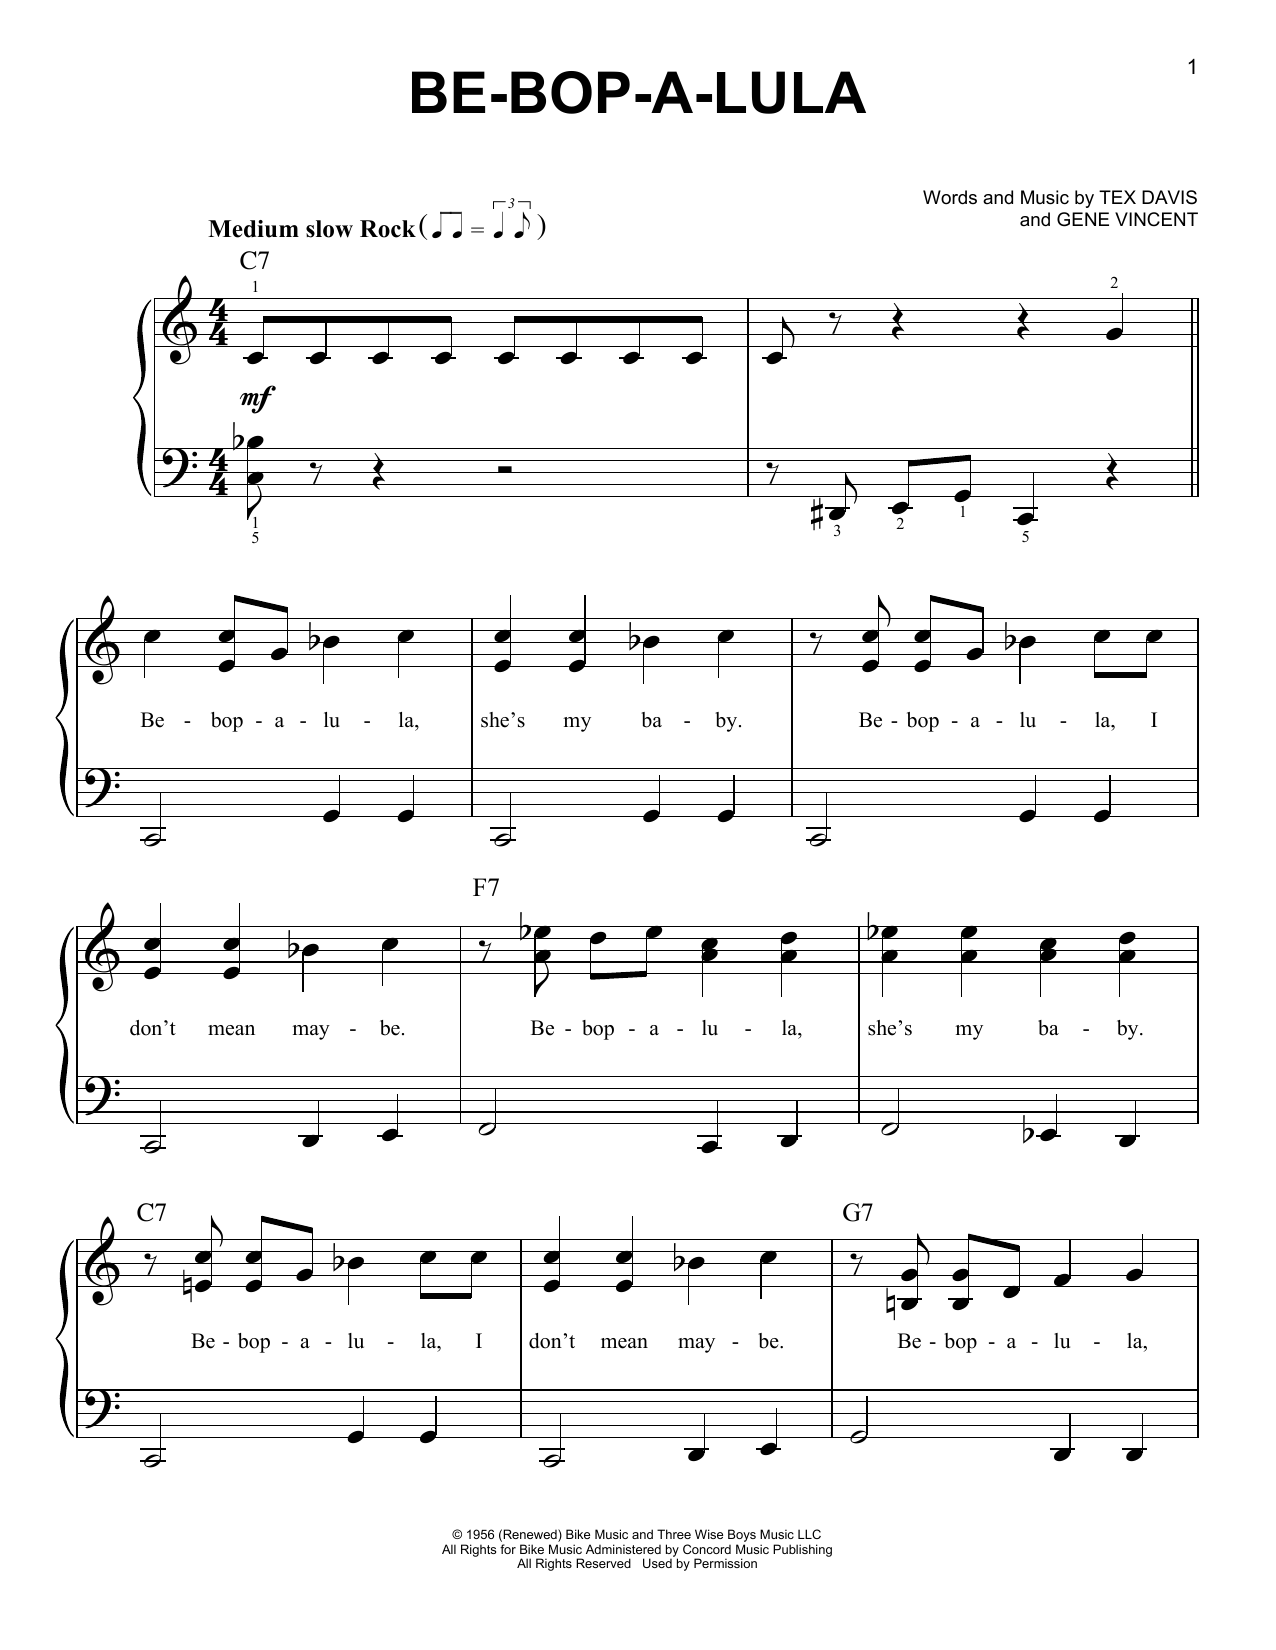 Gene Vincent Be-Bop-A-Lula sheet music notes and chords. Download Printable PDF.